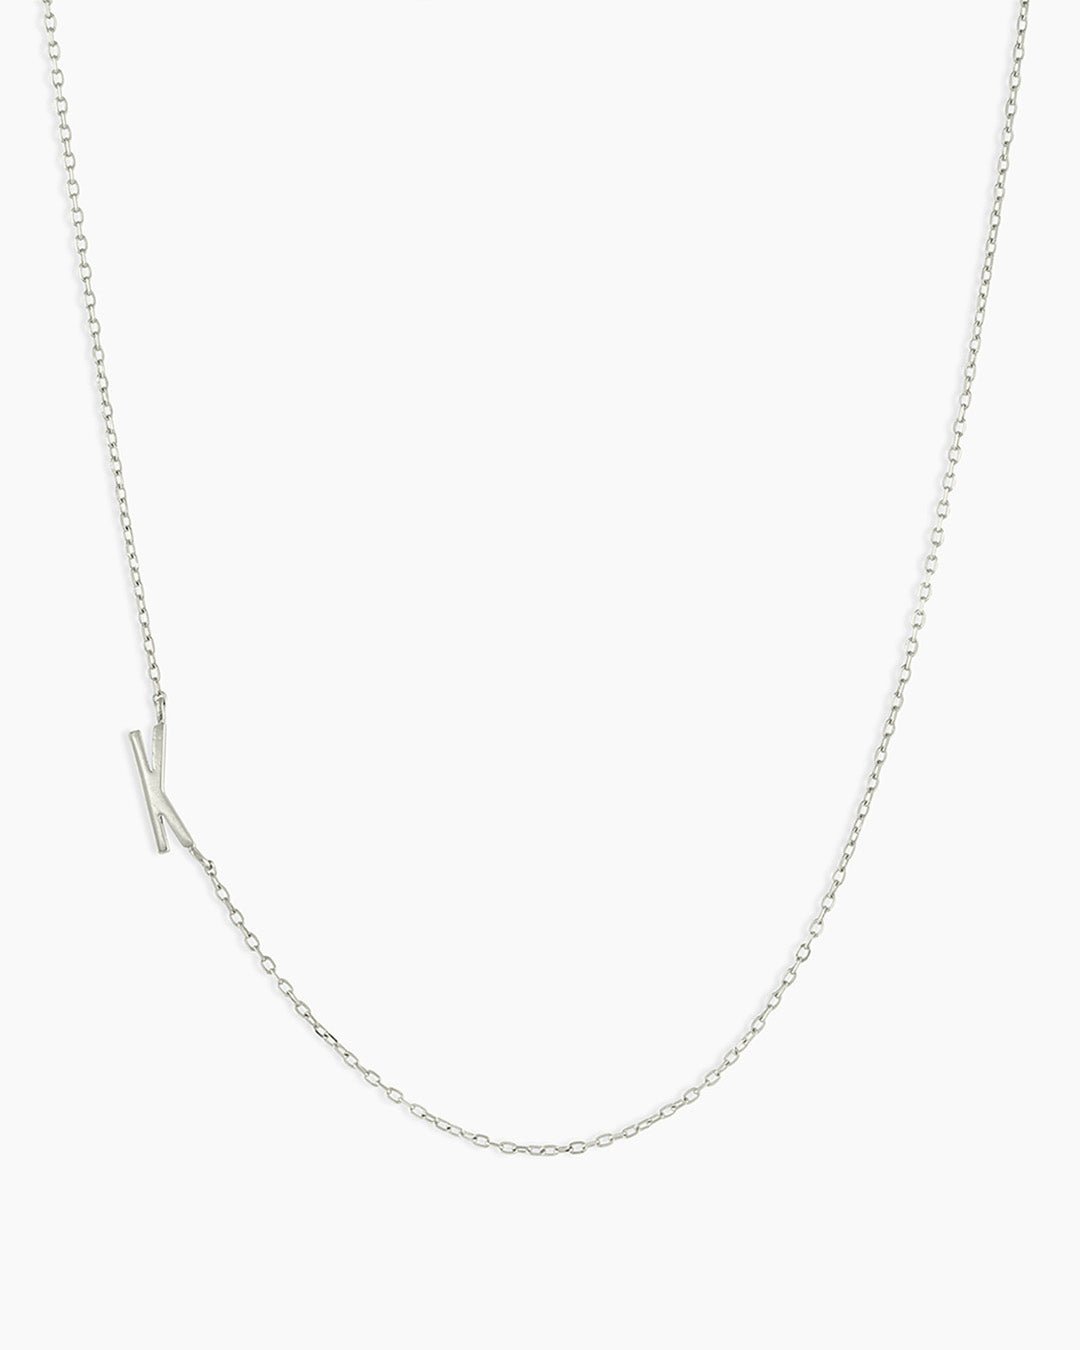 Woman wearing Alphabet Necklace || option::14k Solid White Gold, K